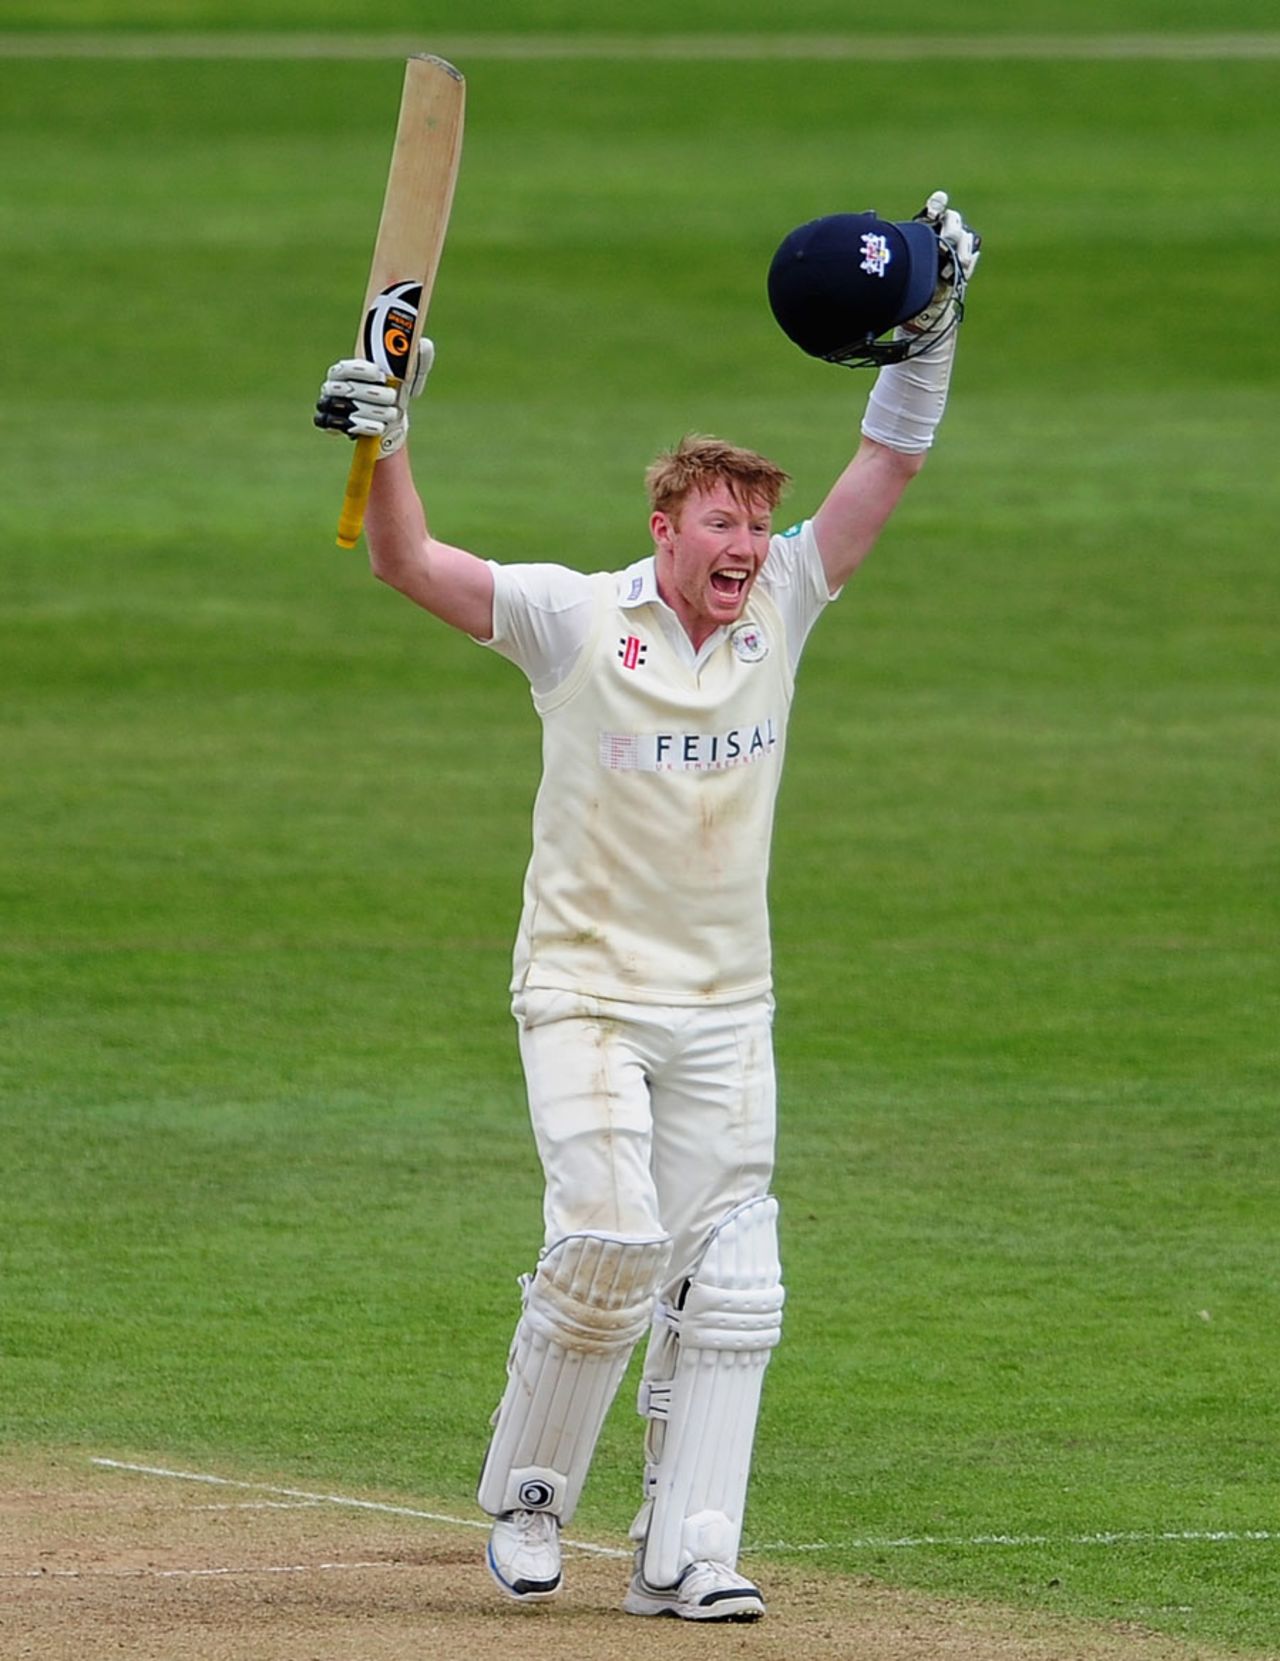 Nightwatchman Liam Norwell hit his maiden first-class century, Gloucestershire v Derbyshire, County Championship, Division Two, Bristol, 3rd day, April 19, 2016